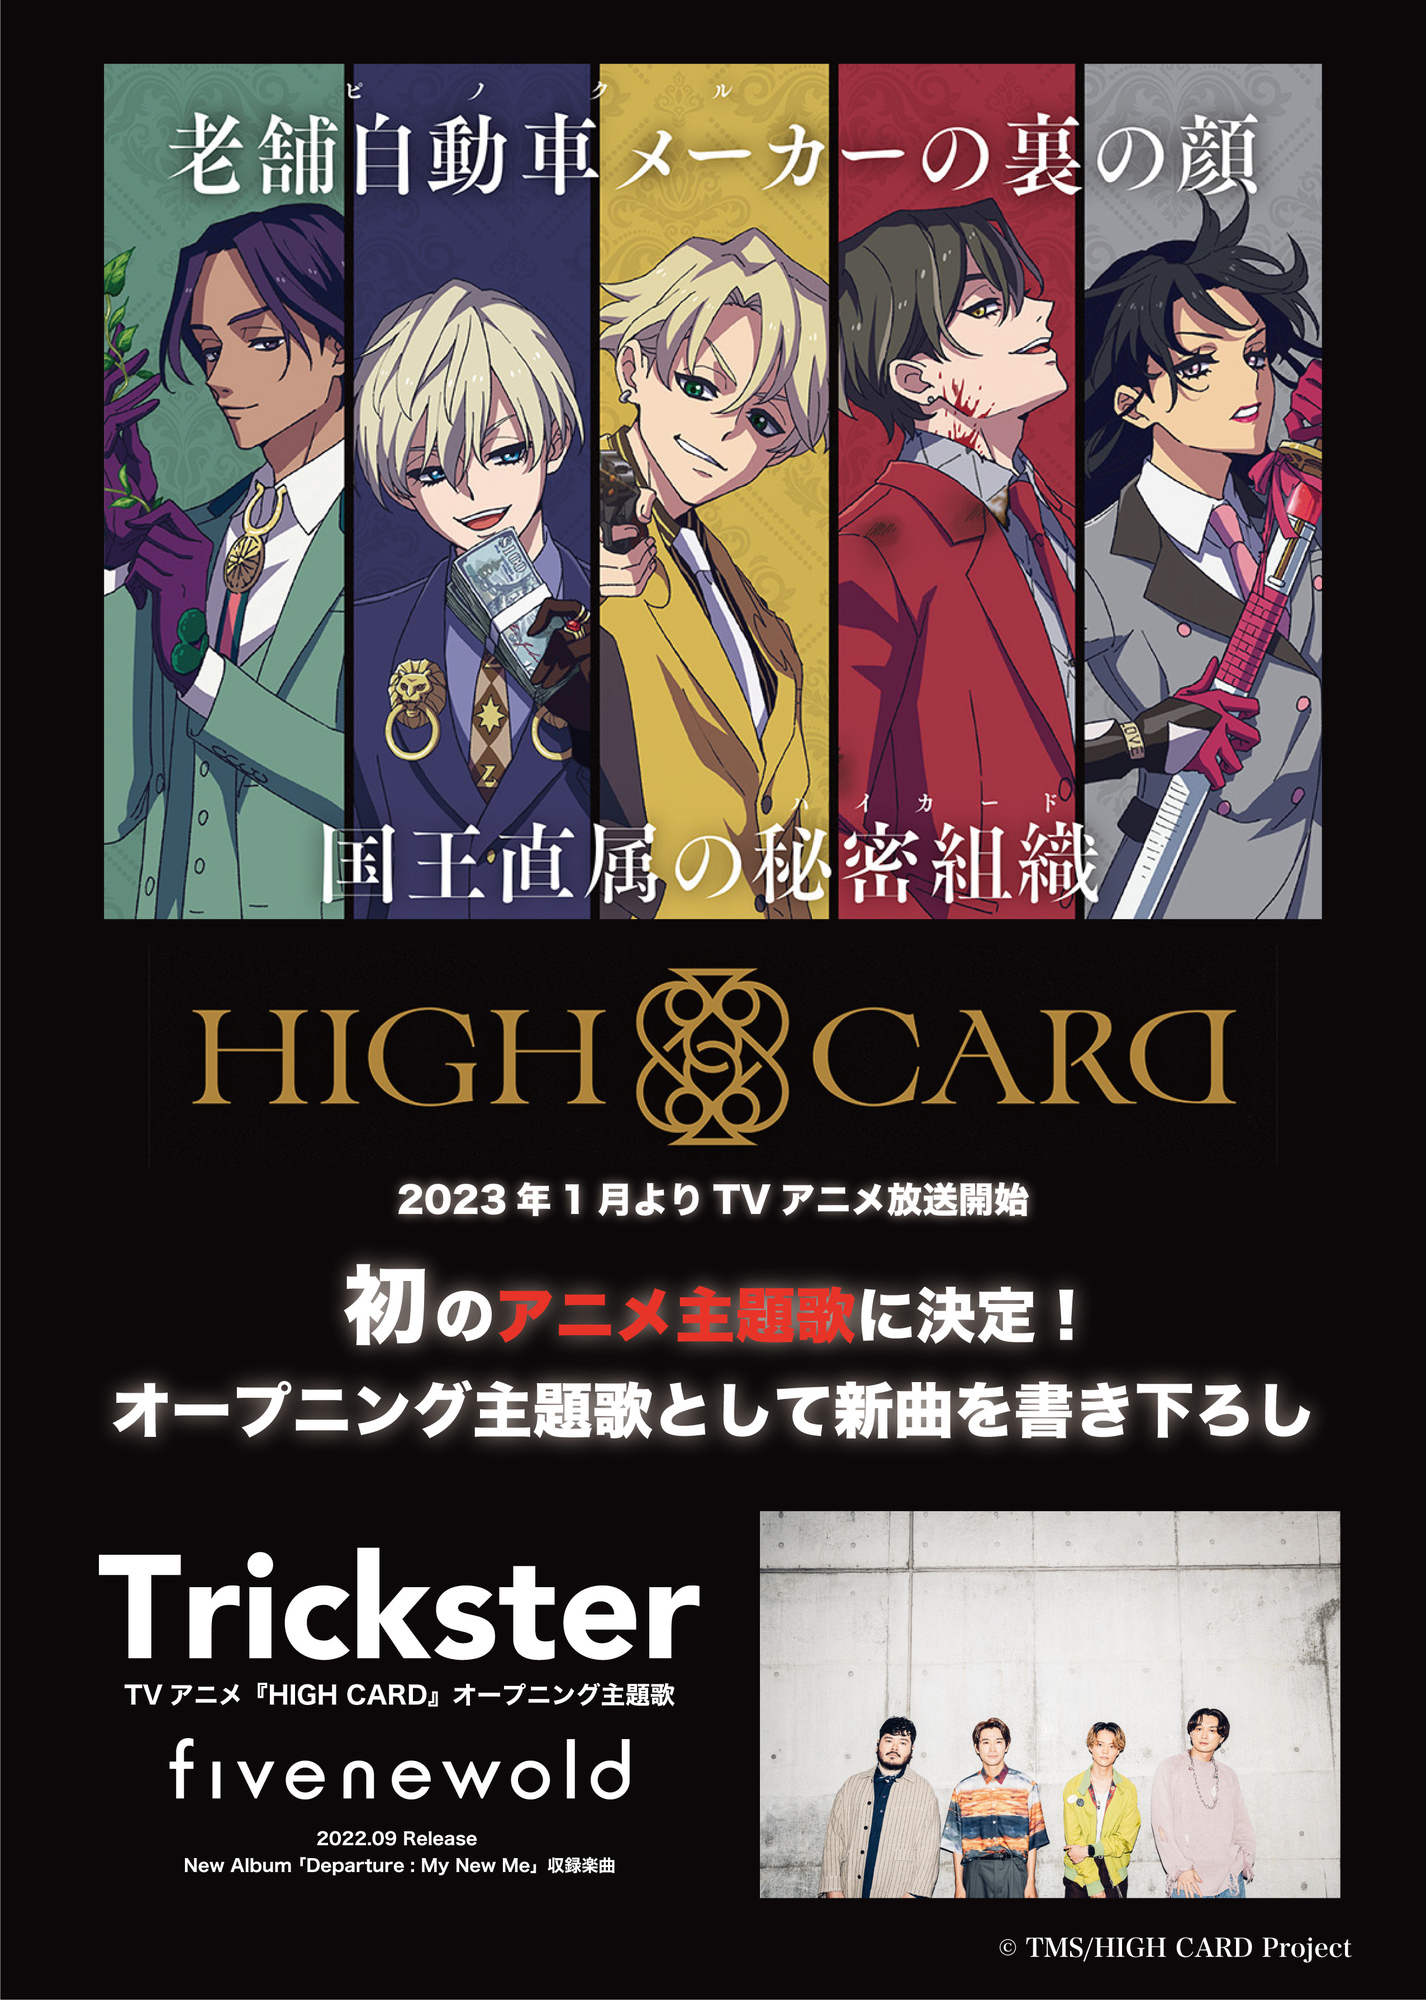 FIVE NEW OLD オリジナルTVアニメ「HIGH CARD」主題歌に決定！ | FIVE 